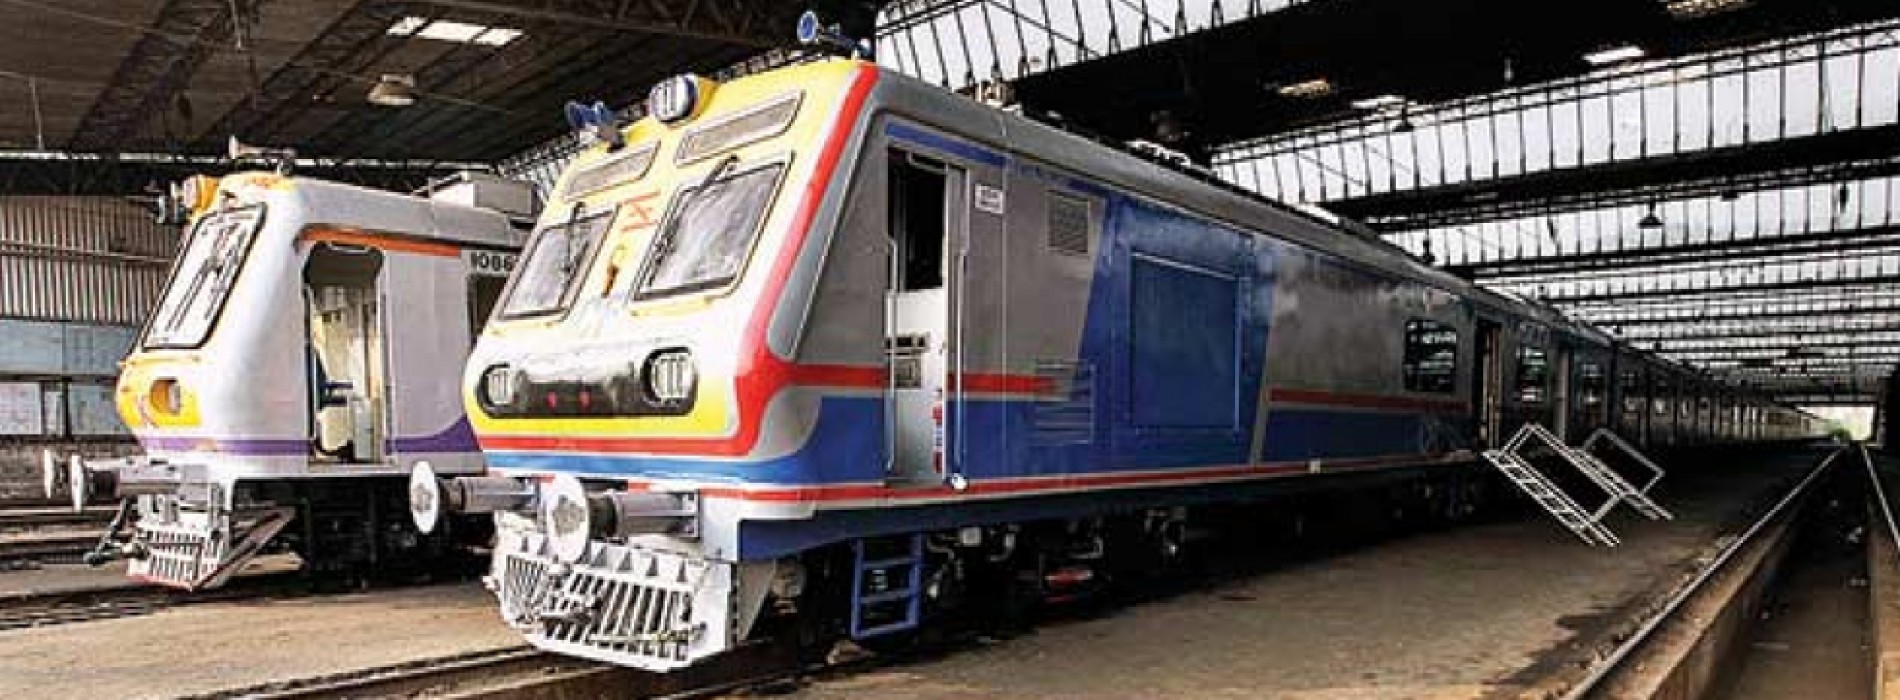 India’s first AC local train flagged off in Mumbai today